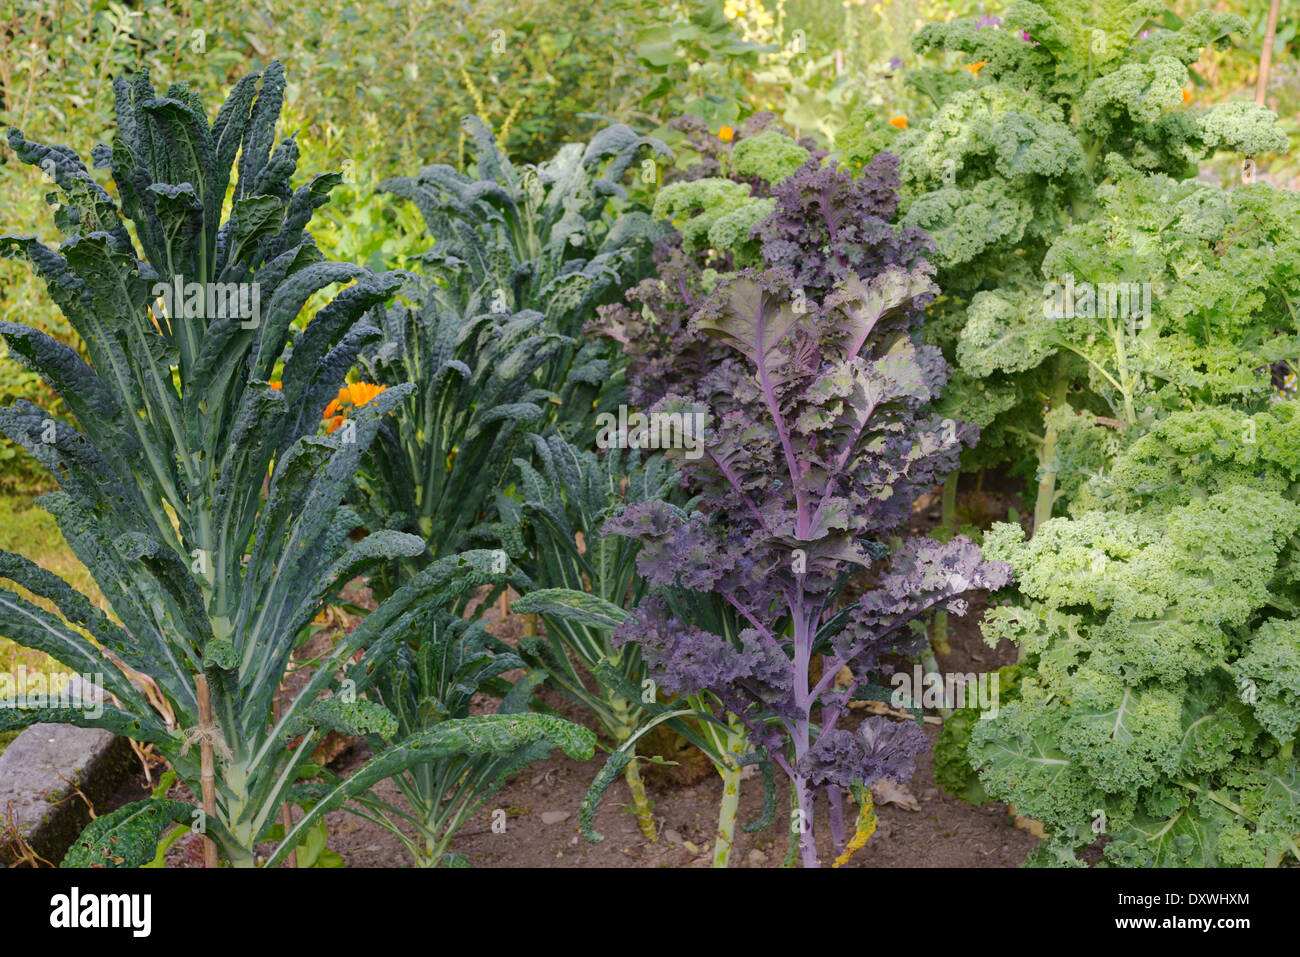 Kale plants, 'Nero di Toscana', 'Scarlet Curly' and 'Starbor', Wales, UK. Stock Photo